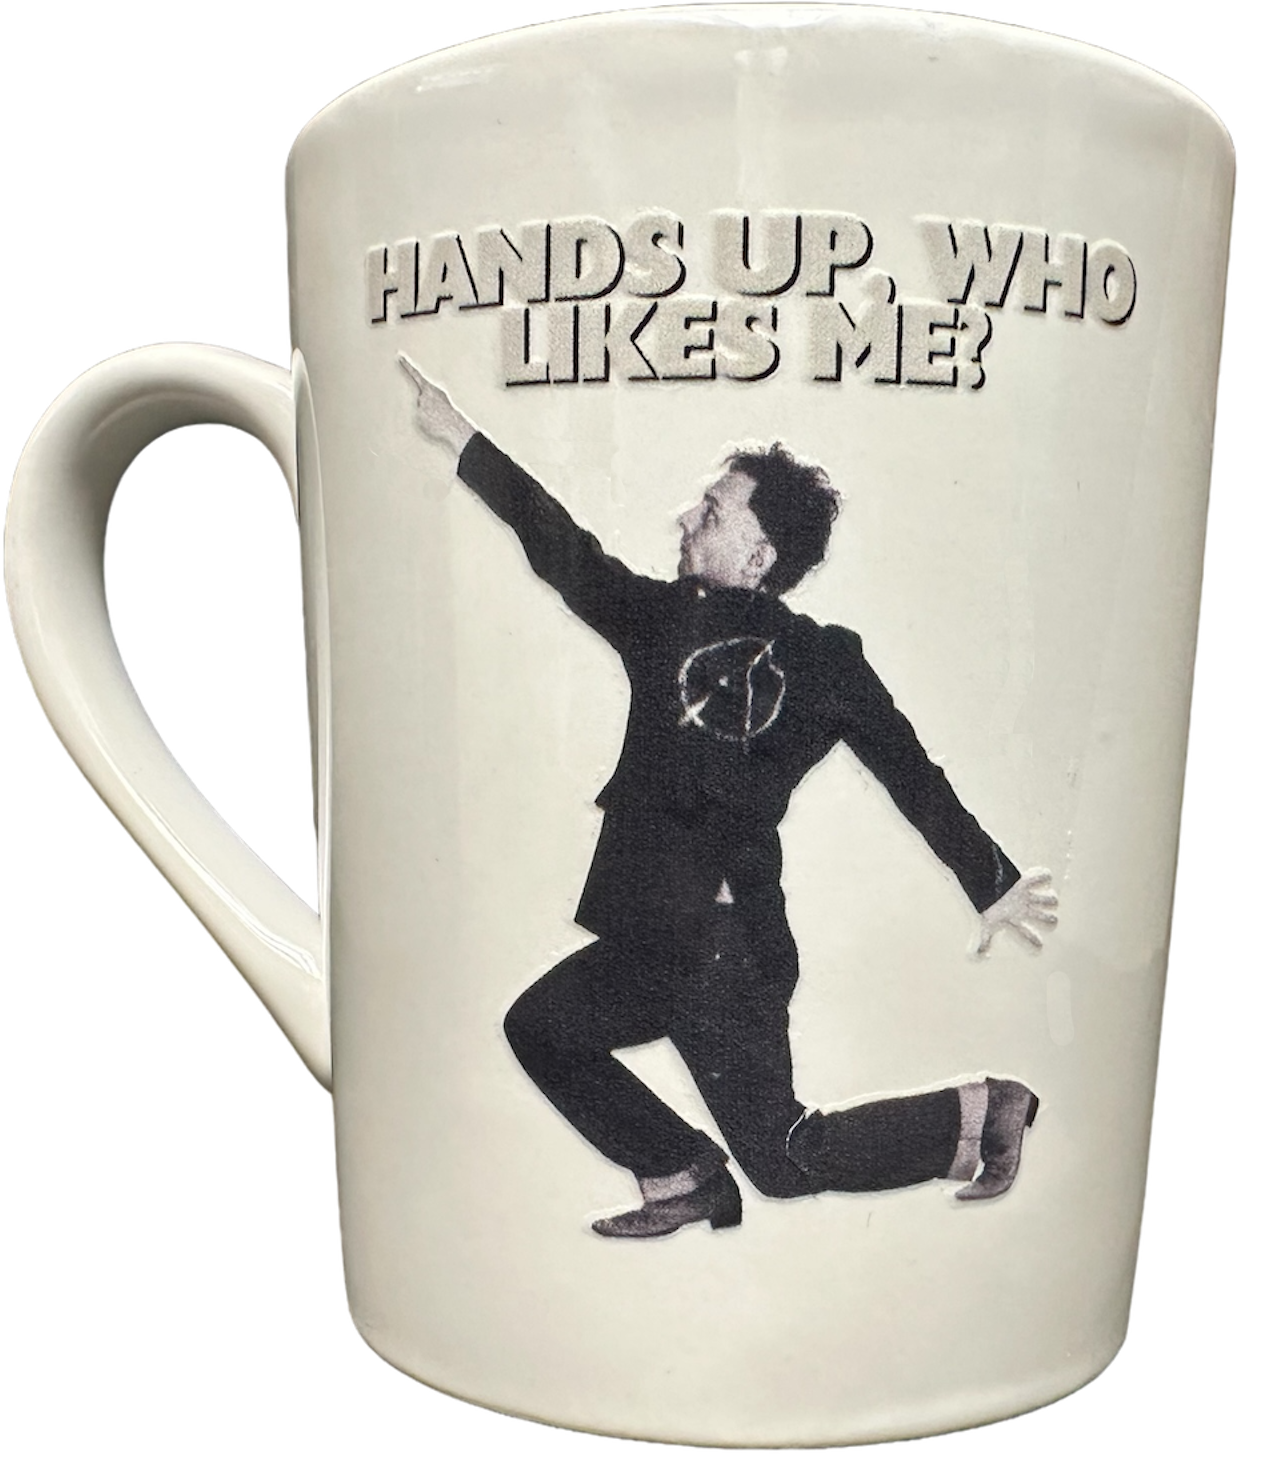 YOUNG ONES : "RIK HANDS UP WHO LIKES ME?" COFFEE MUG